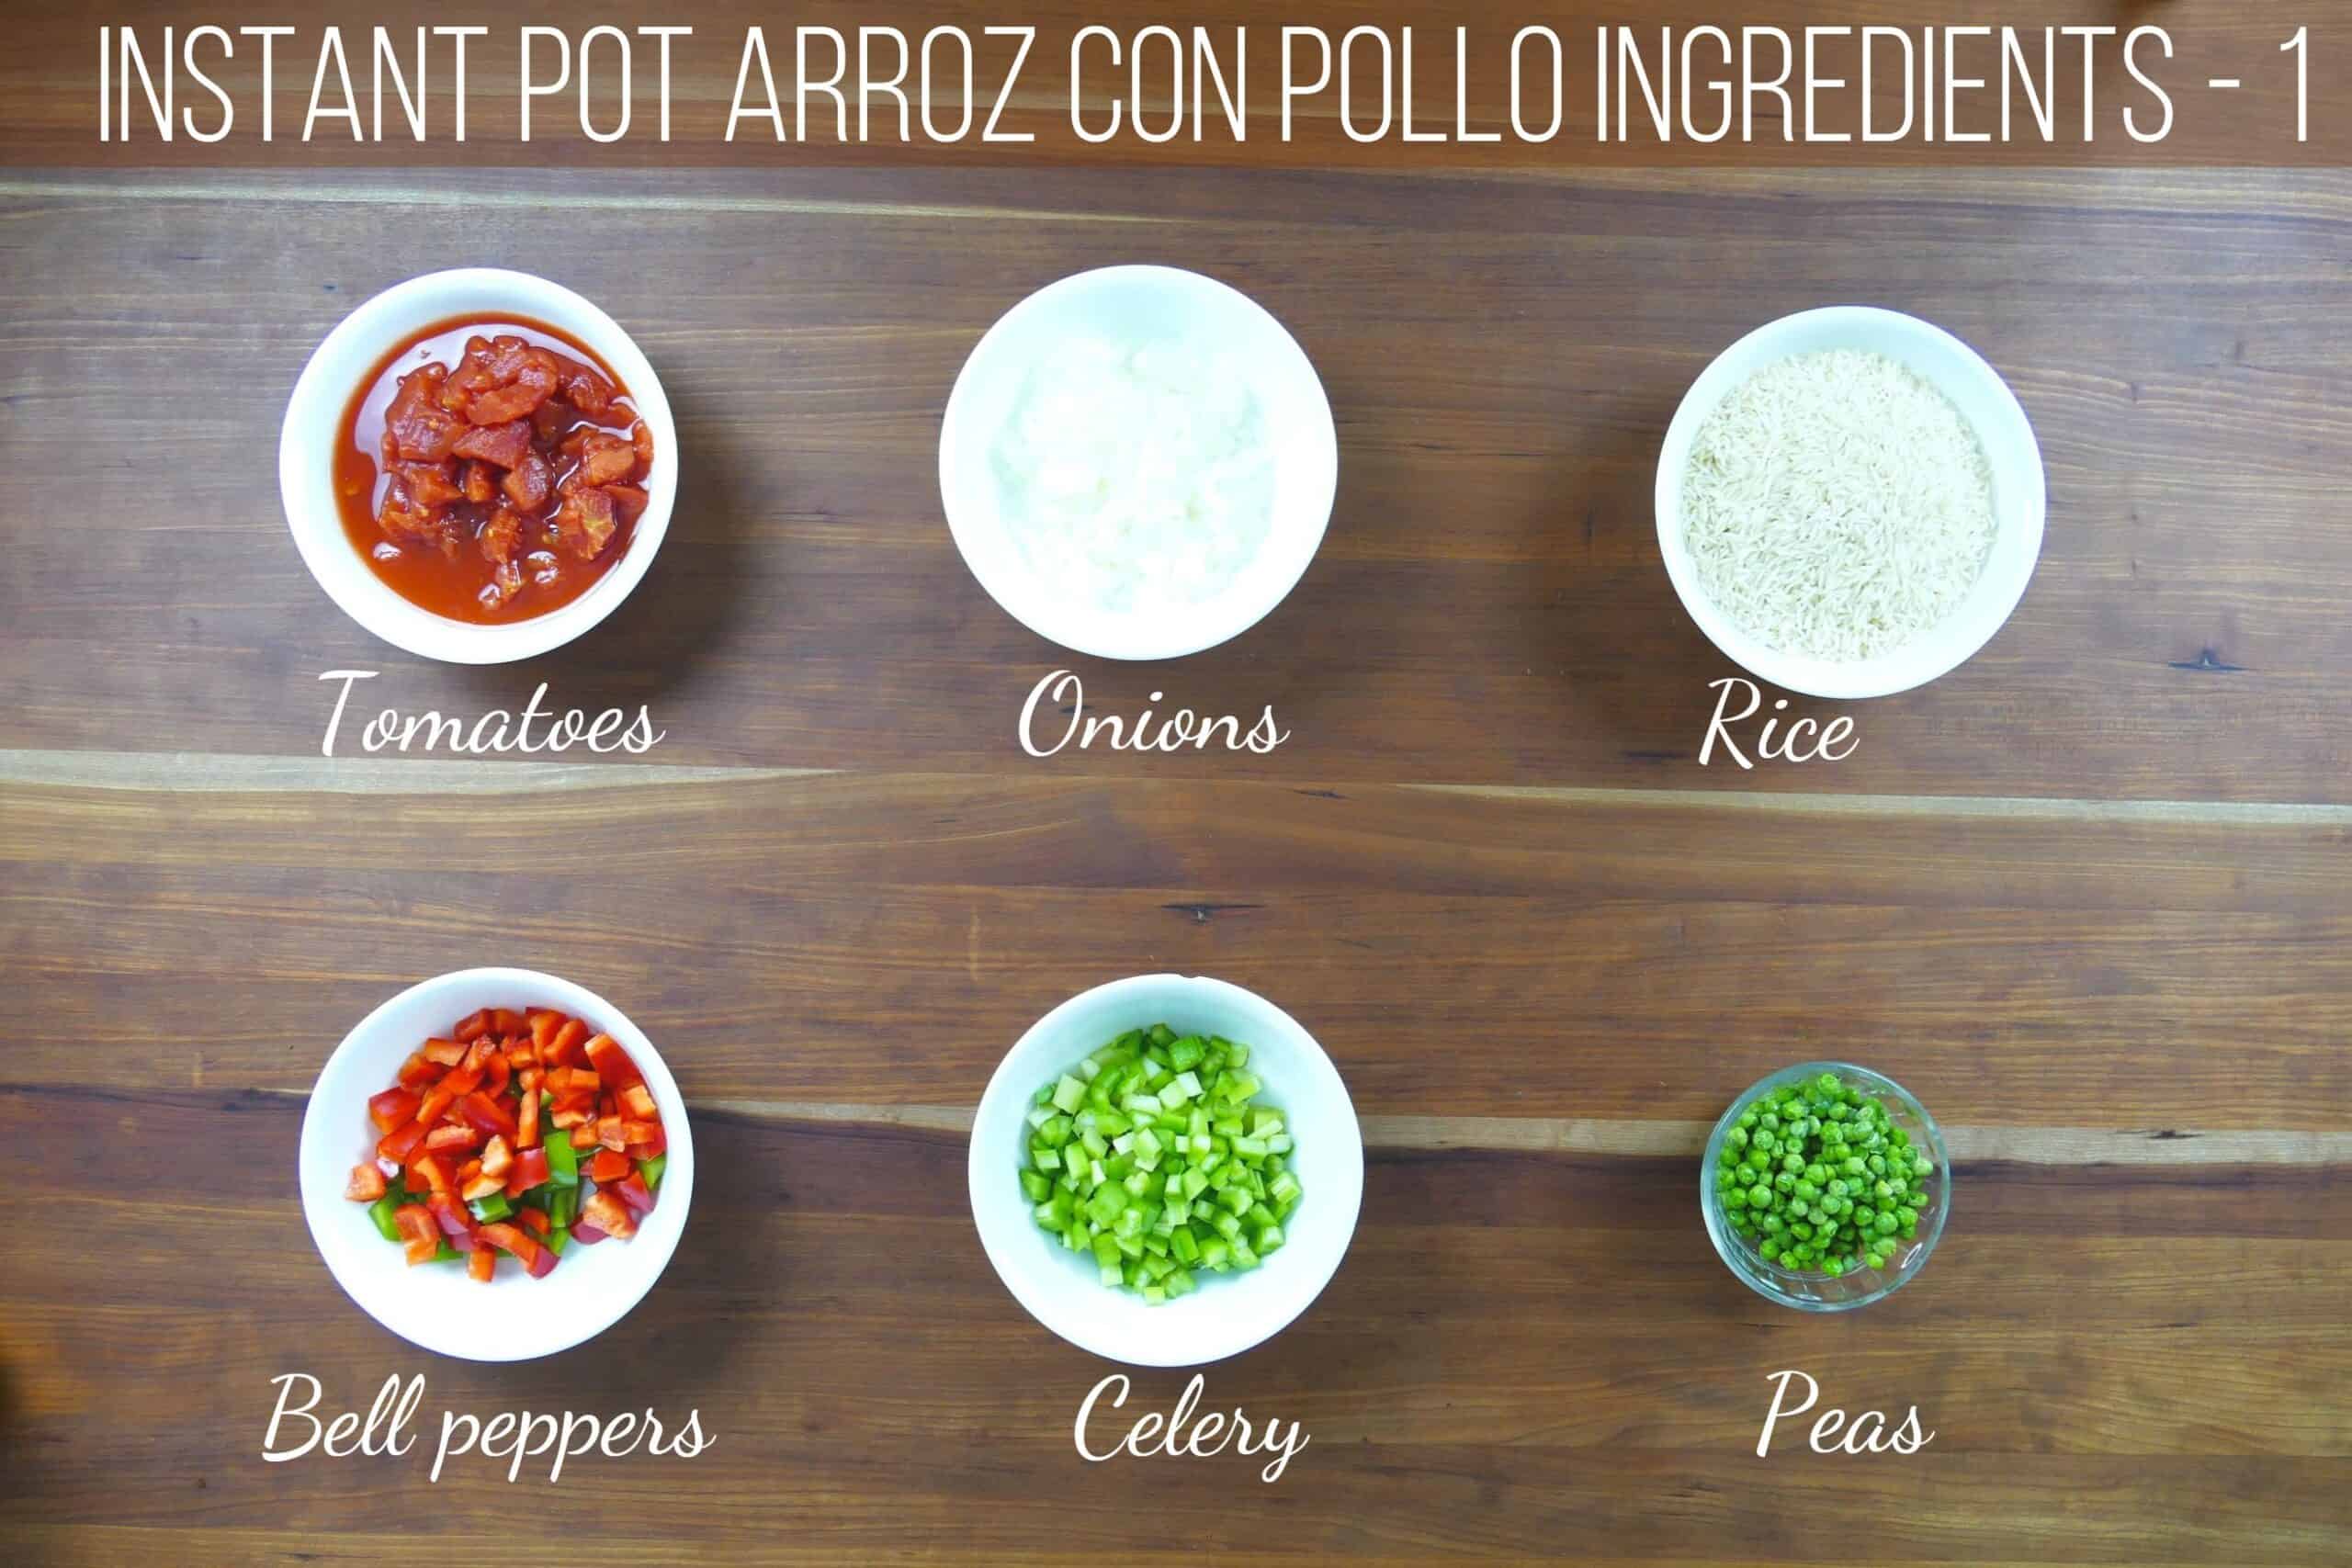 instant pot arroz con pollo ingredients - tomatoes, onions, rice, bell peppers, celery, peas - Paint the Kitchen Red.jpg